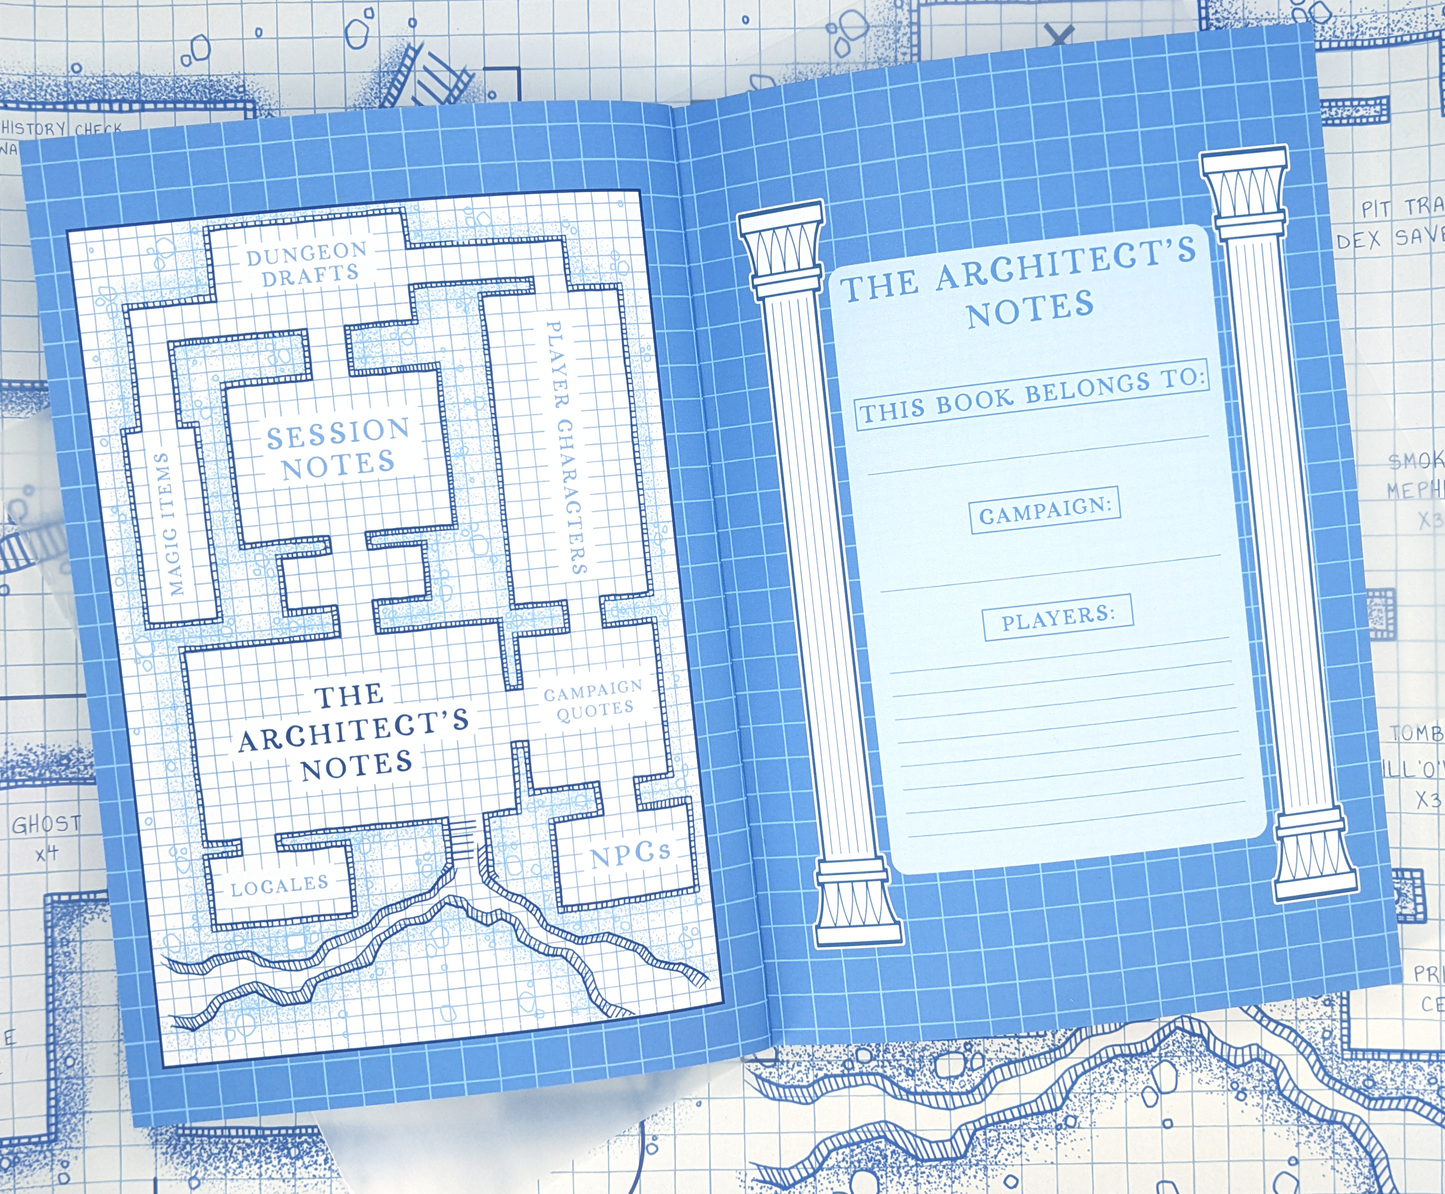 [The Architect] Dungeon Master's Table Notebook